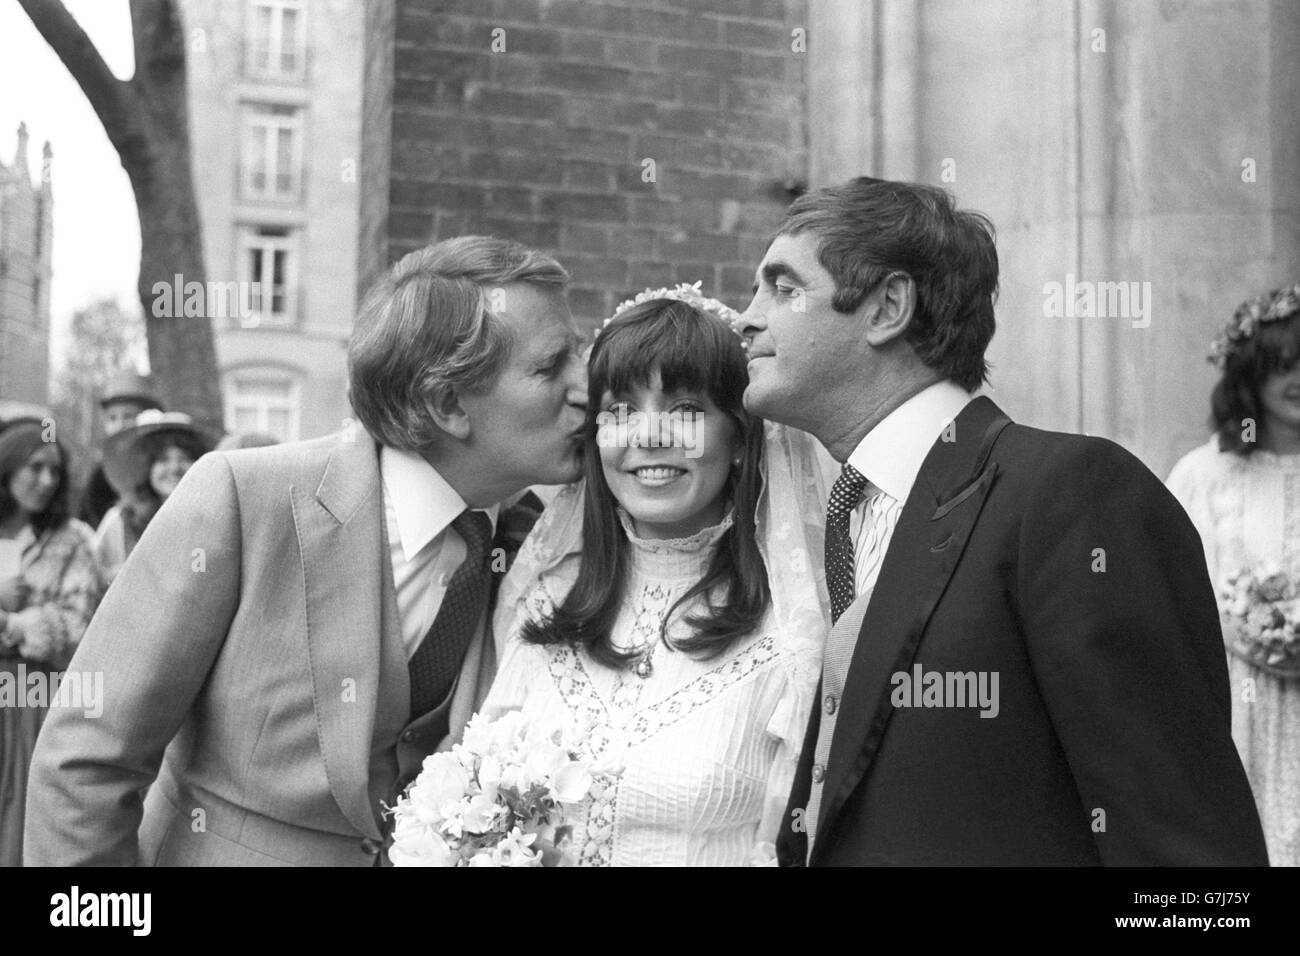 Comedy actor and TV personality Lance Percival, 44, kisses his new bride, Serena Perkins, a 28-year-old receptionist daughter of a London businessman, after their marriage at St Paul's Church, Knightsbridge. Stock Photo